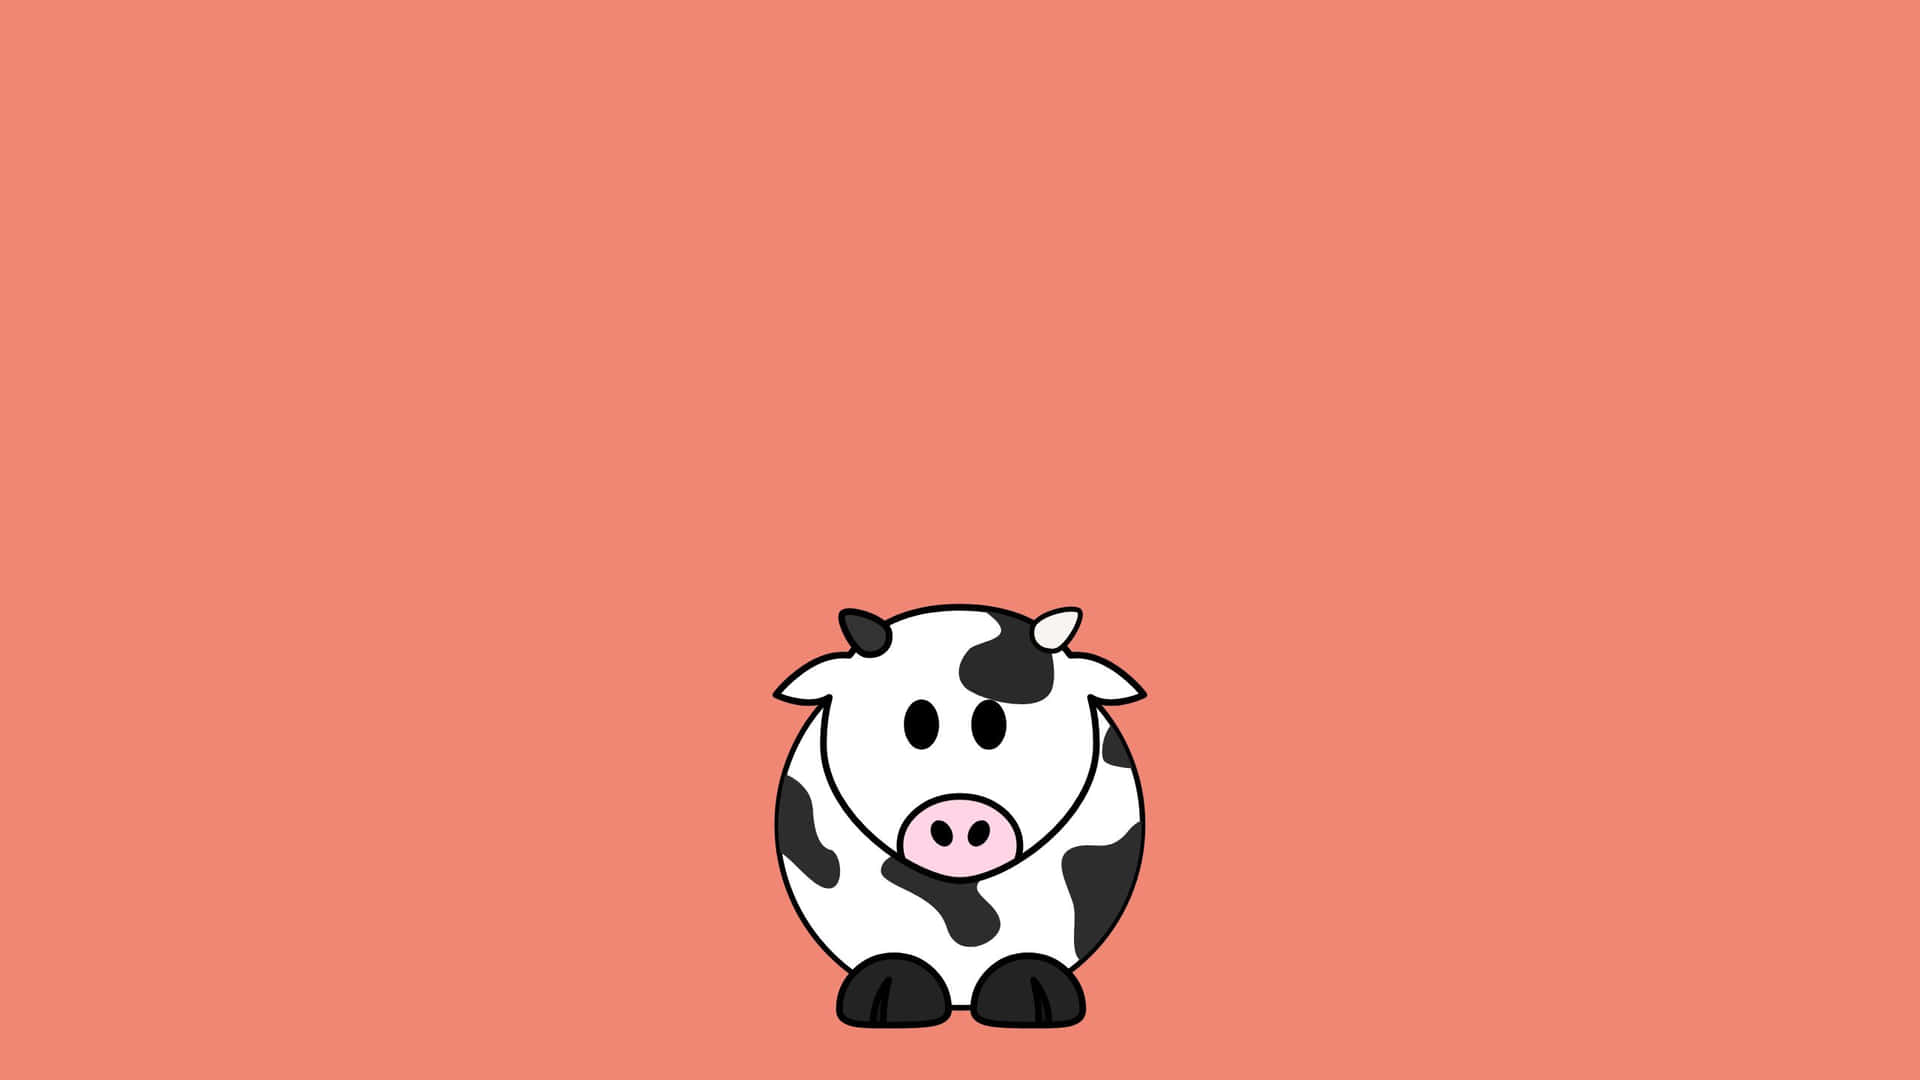 A Cartoon Cow Standing On A Pink Background